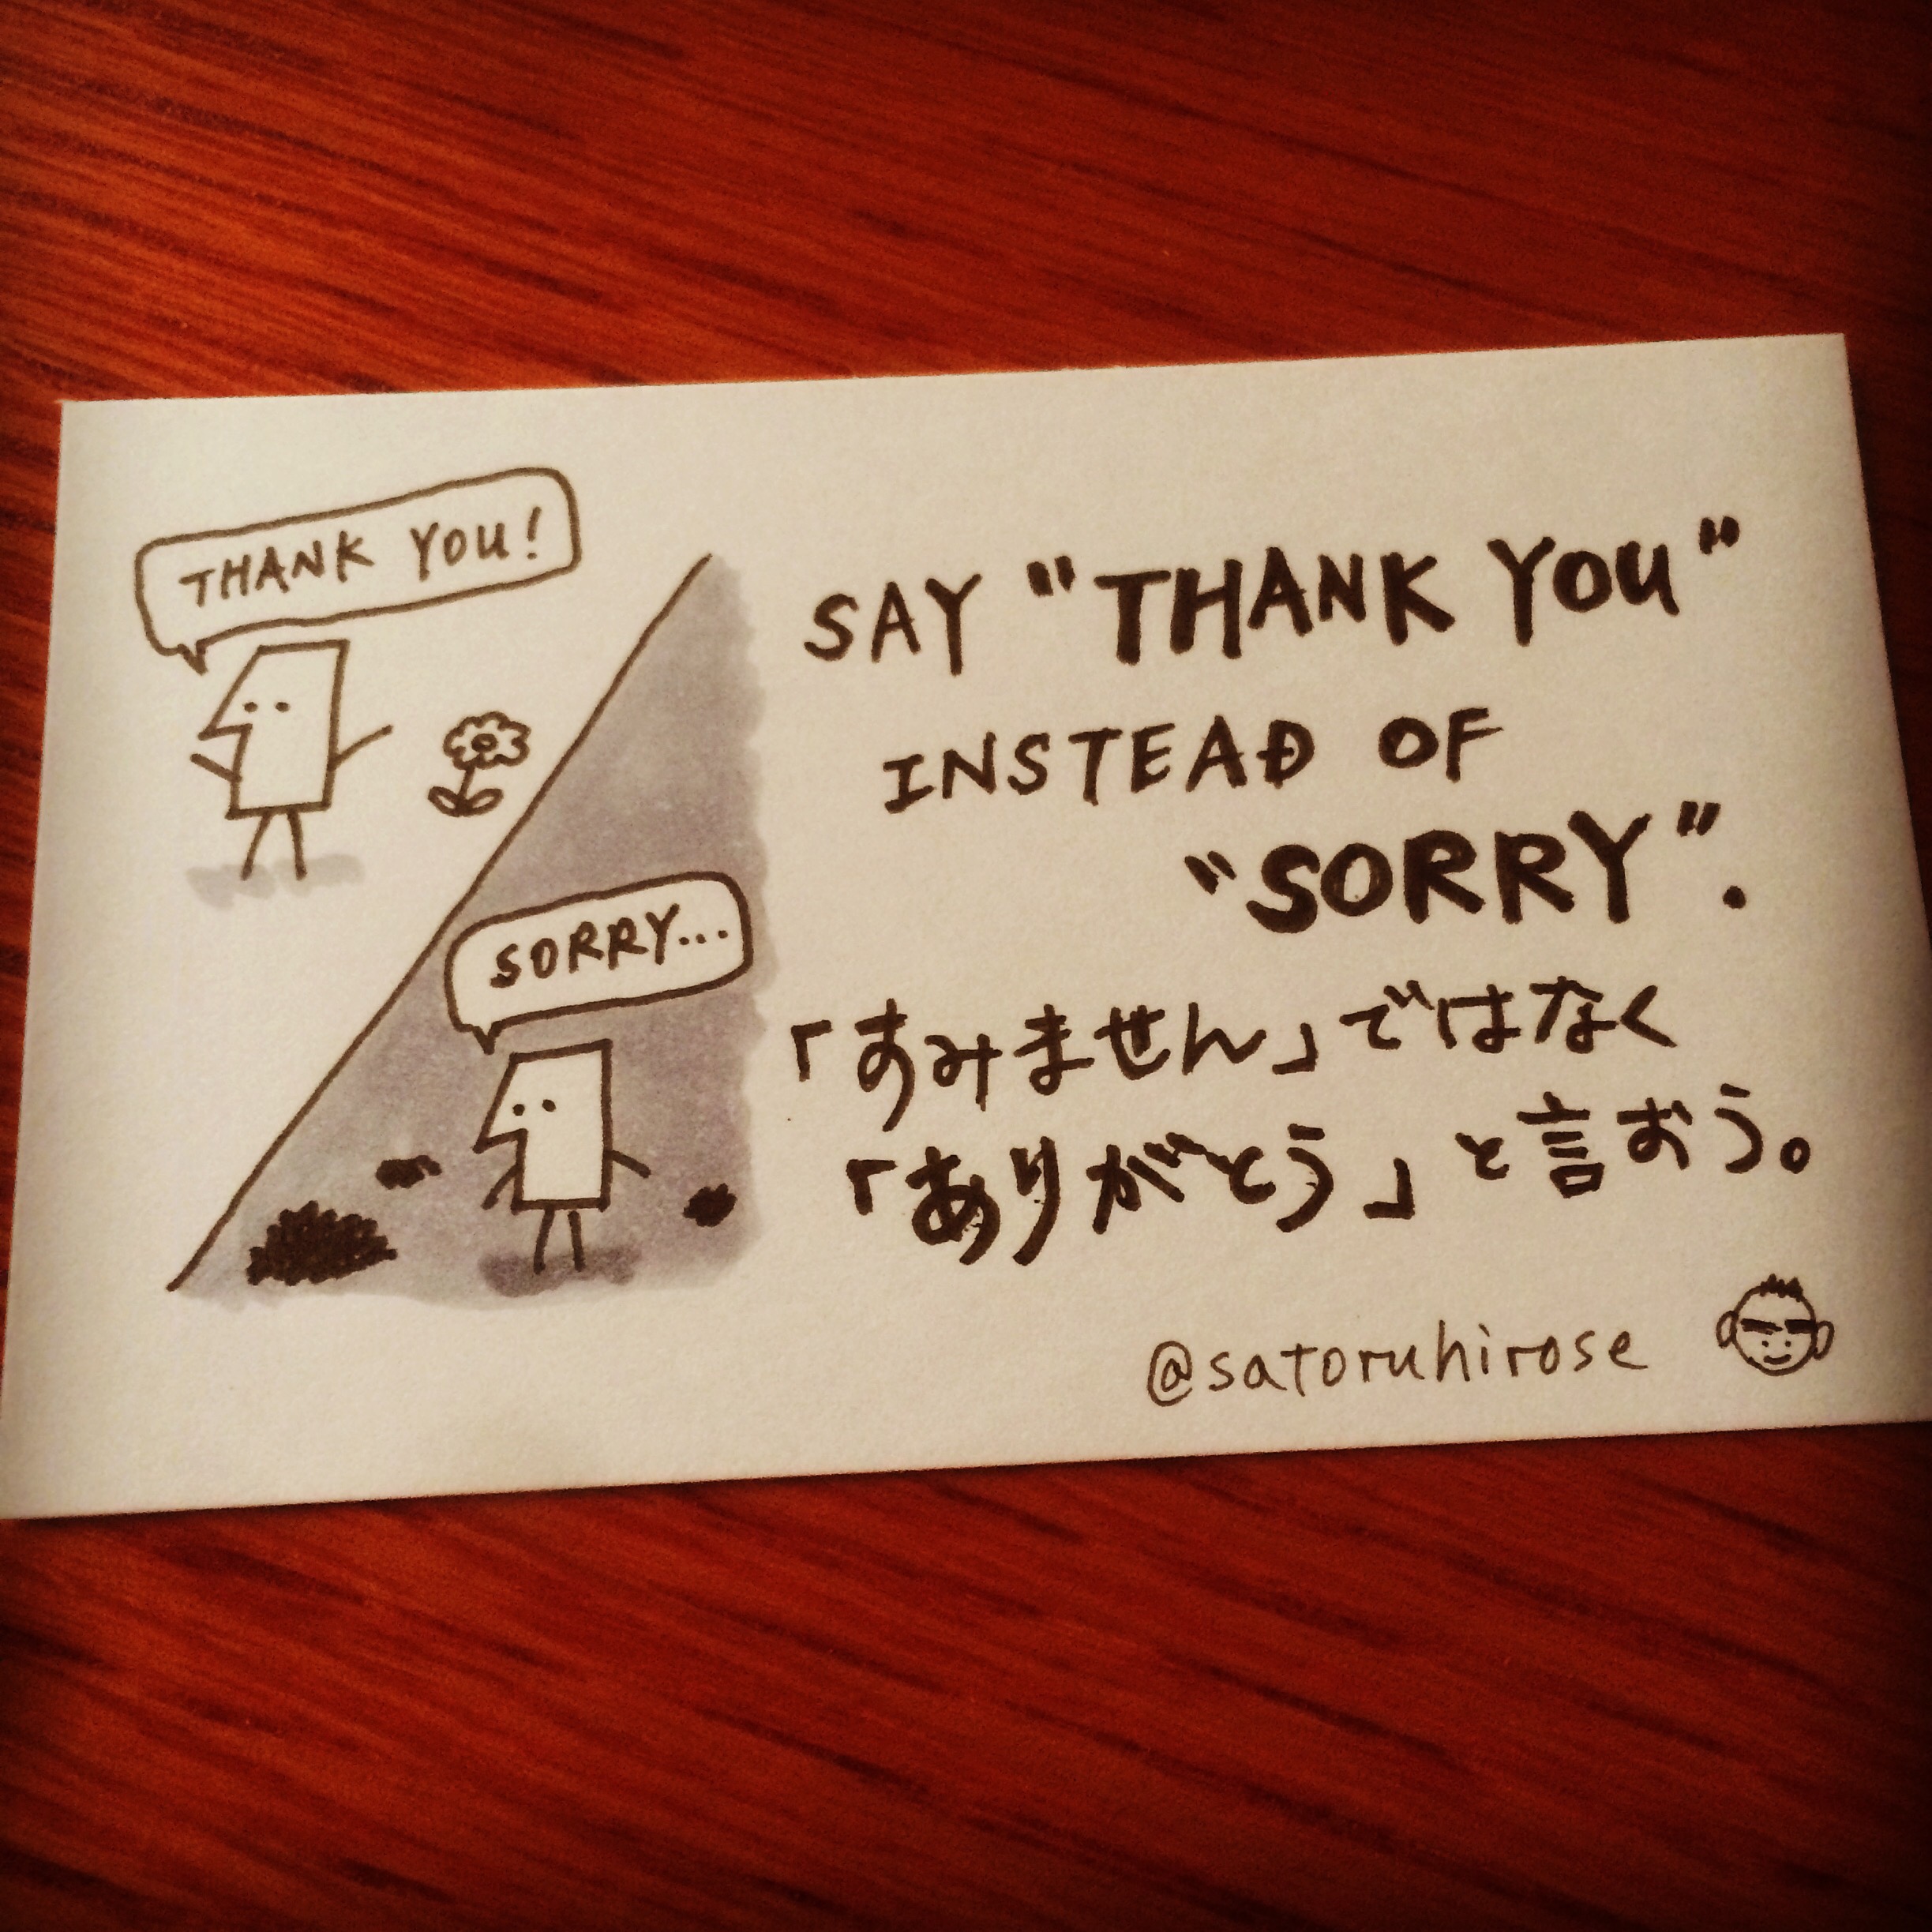 Say "thank you" instead of "sorry".